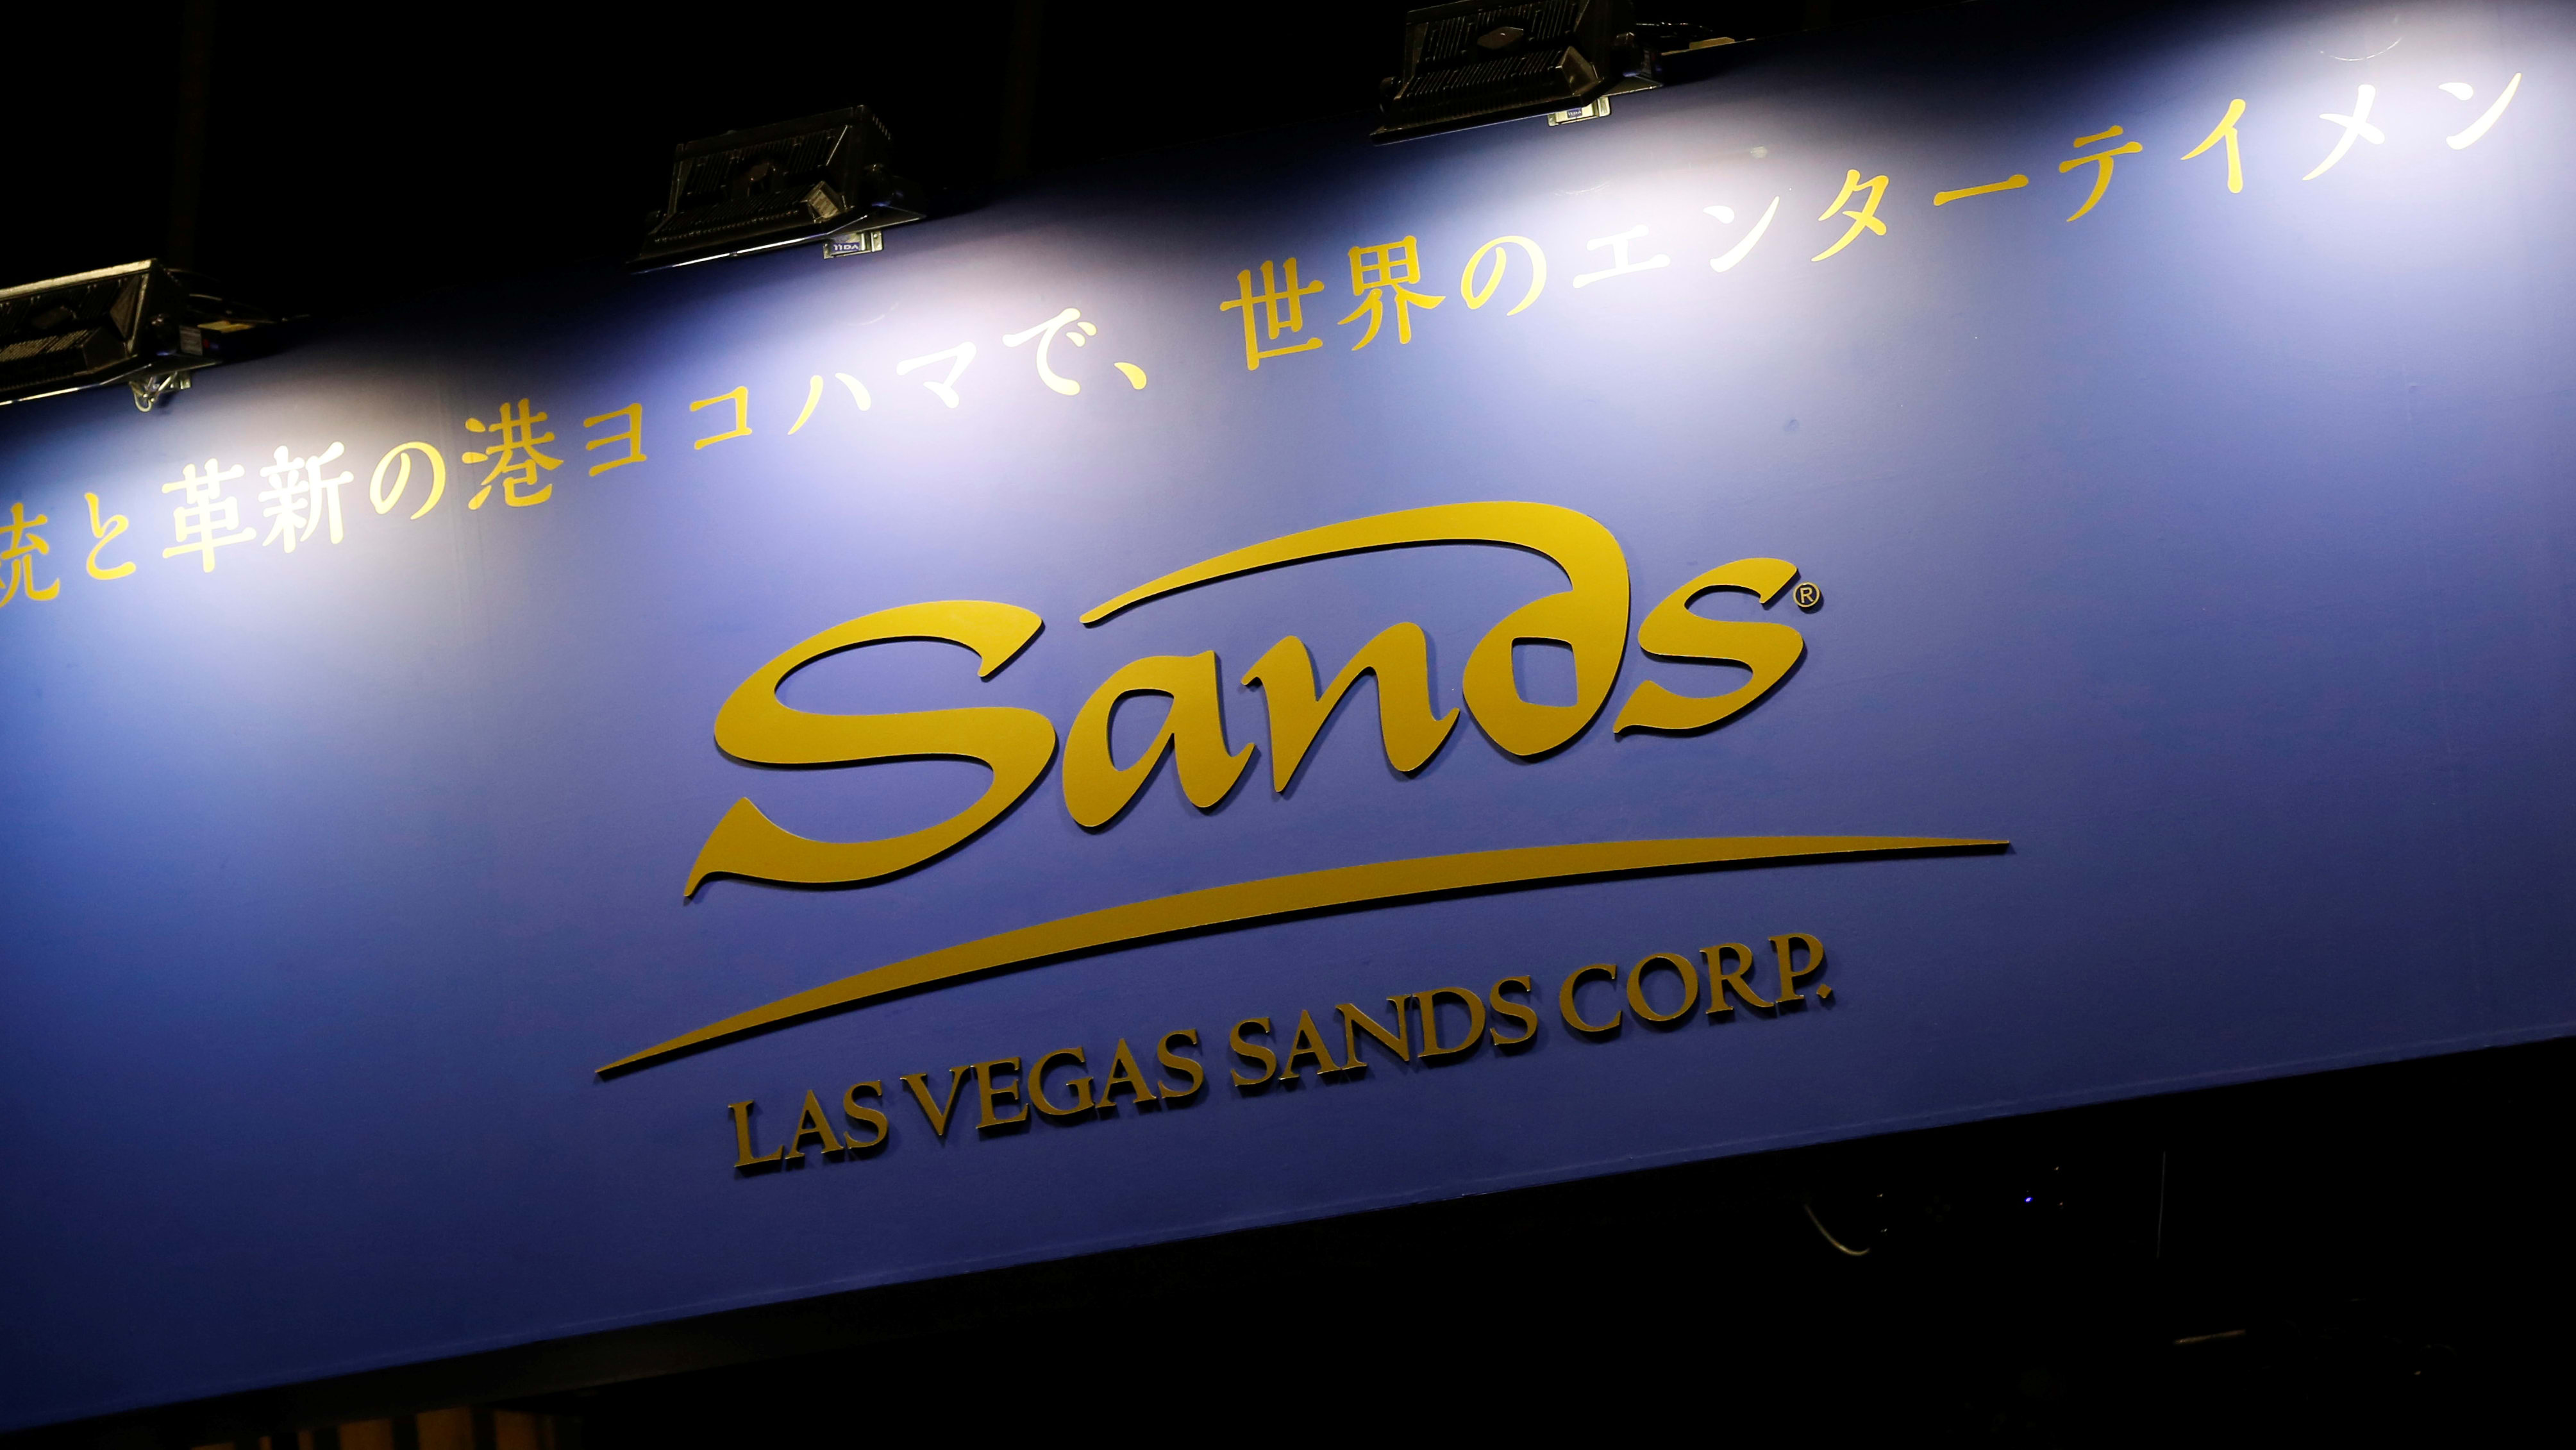 Baron Real Estate Fund Reacquired Las Vegas Sands Corp. (LVS) on China  Reopening